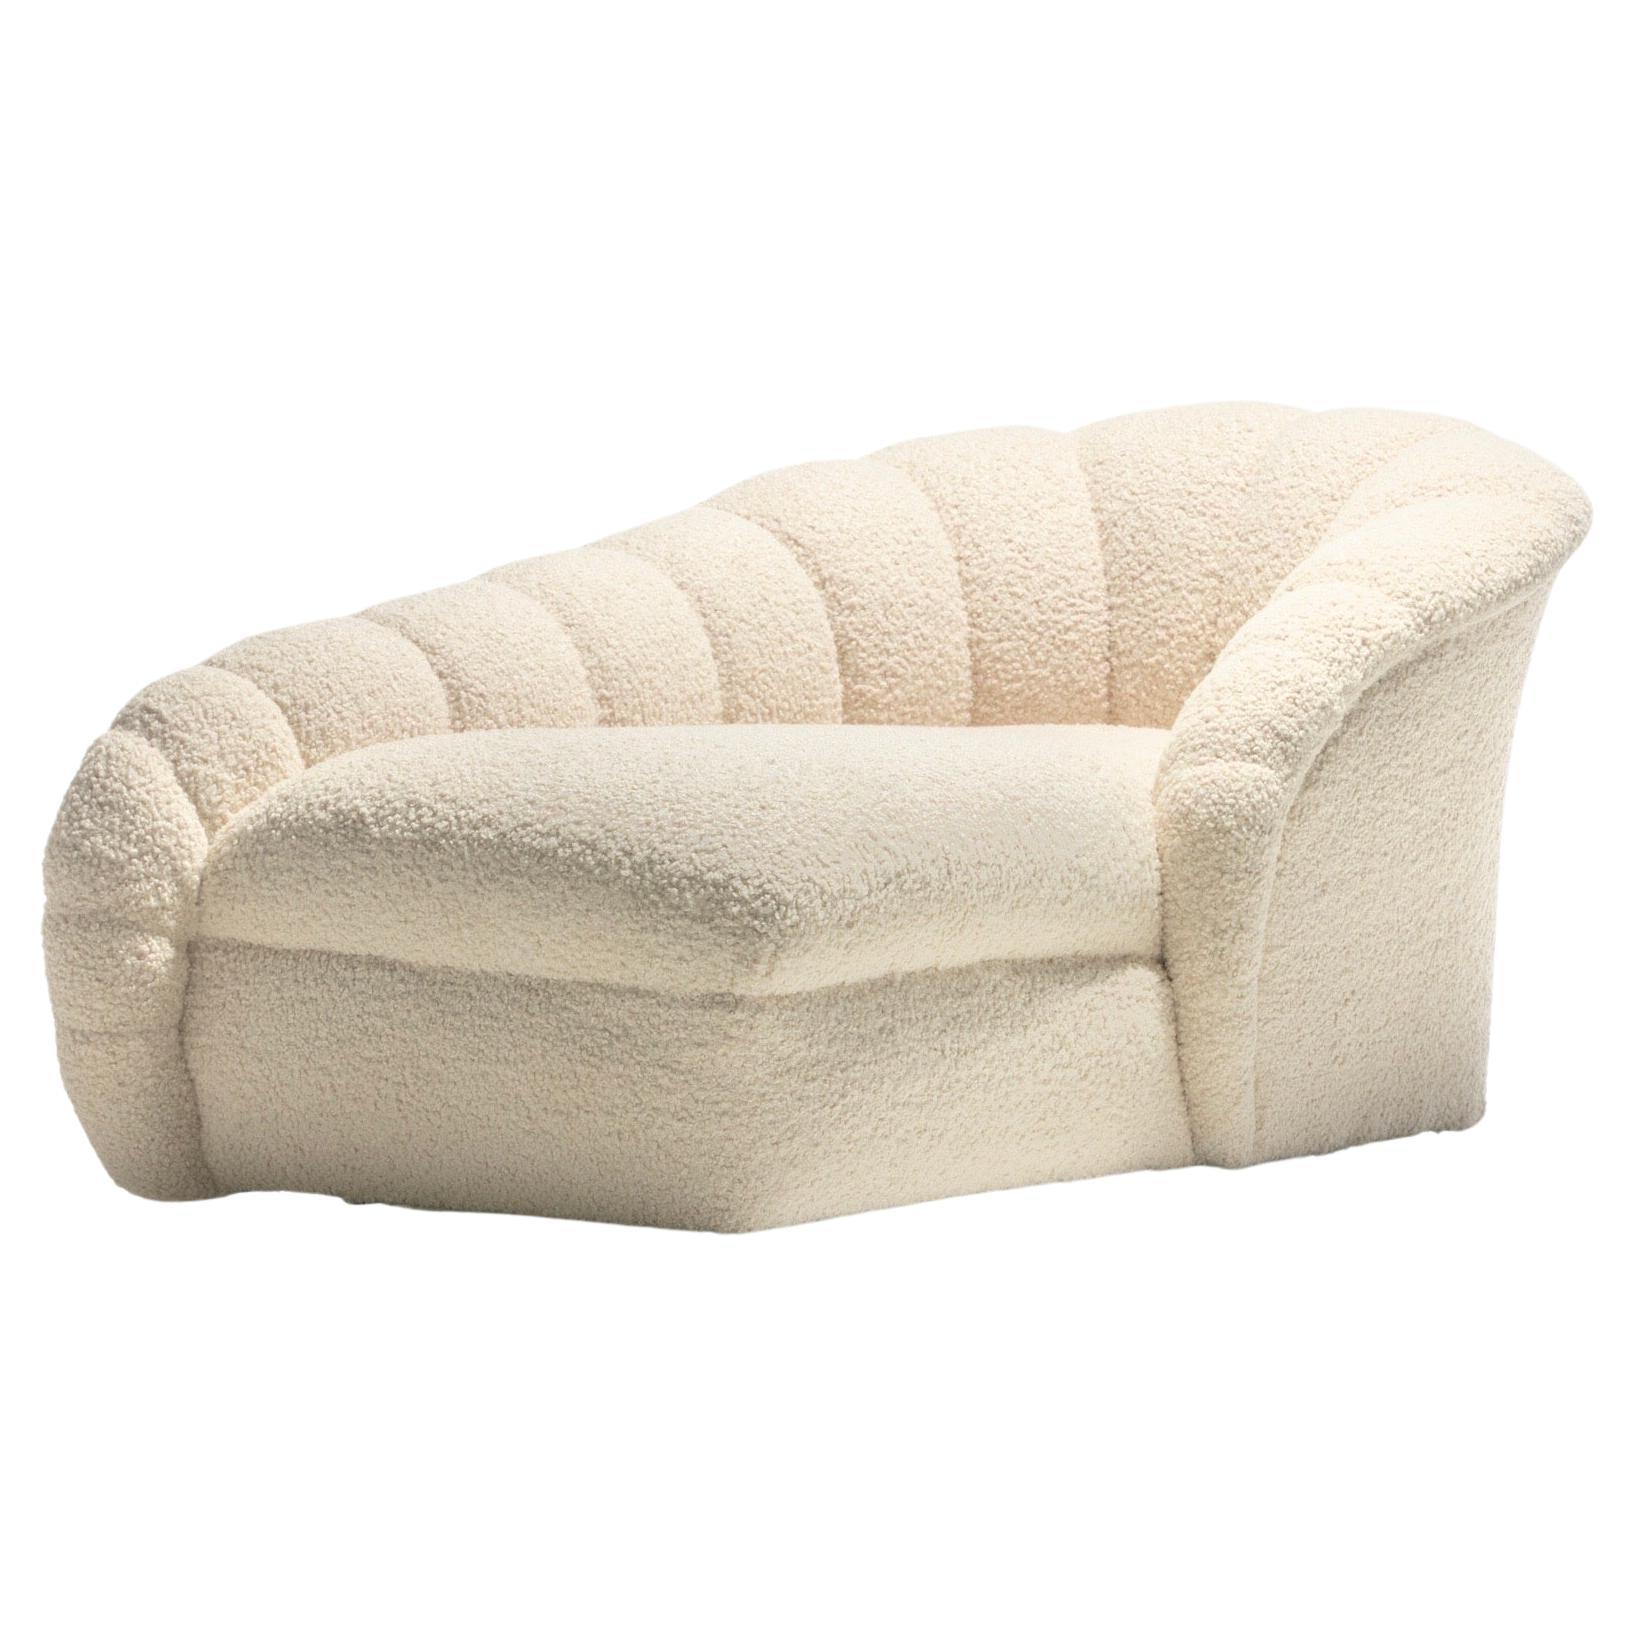 Vladimir Kagan Post Modern Clam Chaise Lounge in Soft Ivory White Bouclé 1980s For Sale